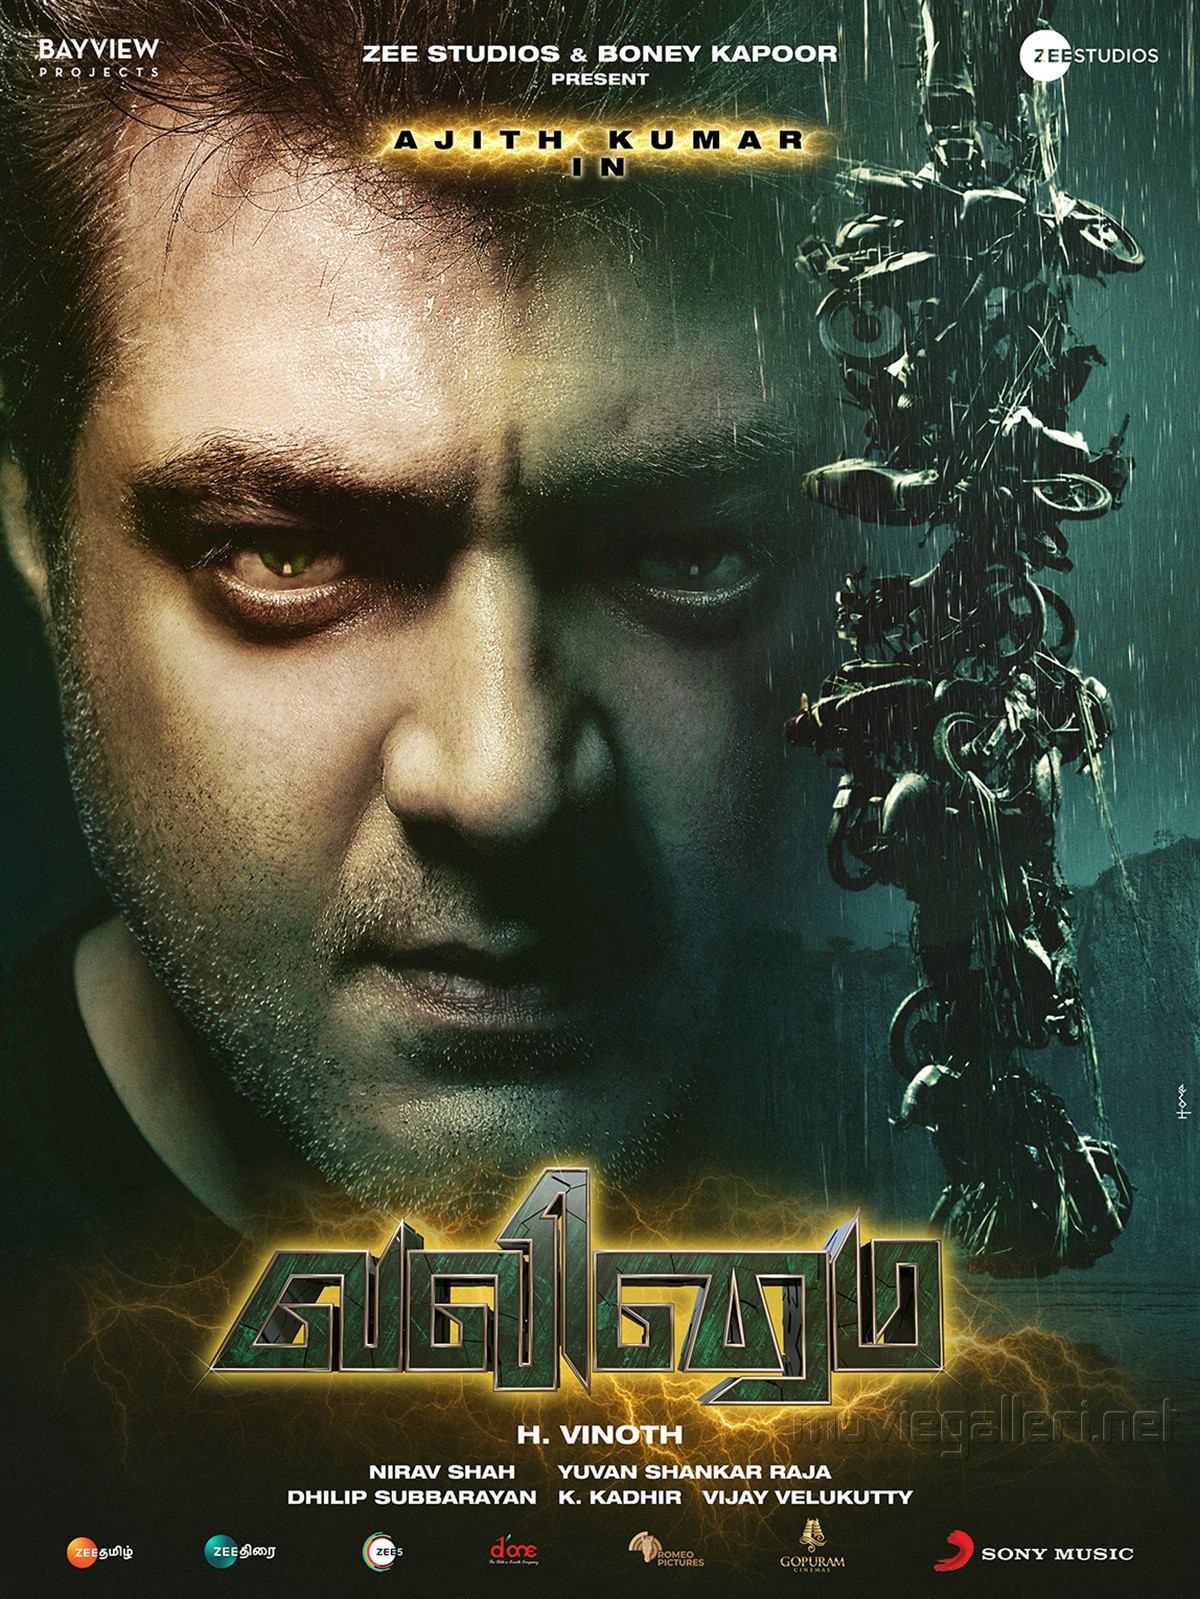 HOW TO CATCH AJITHS TAMIL HIT VALIMAI ON OTT PLATFORM ALL DETAILS